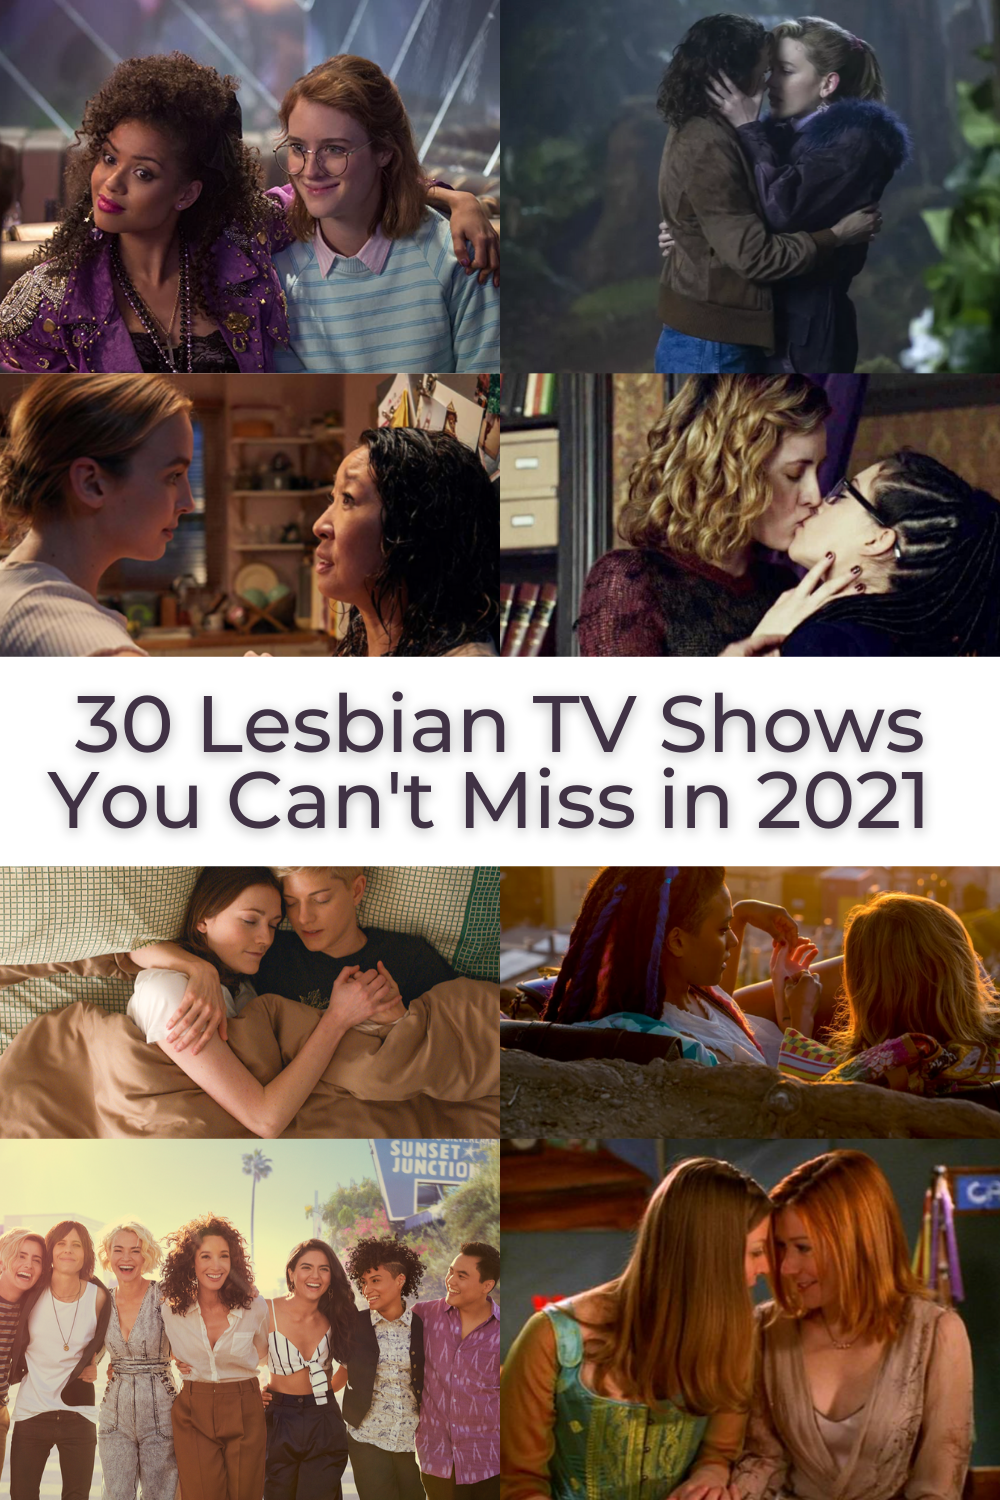 tv shows with lesbian and queer characters